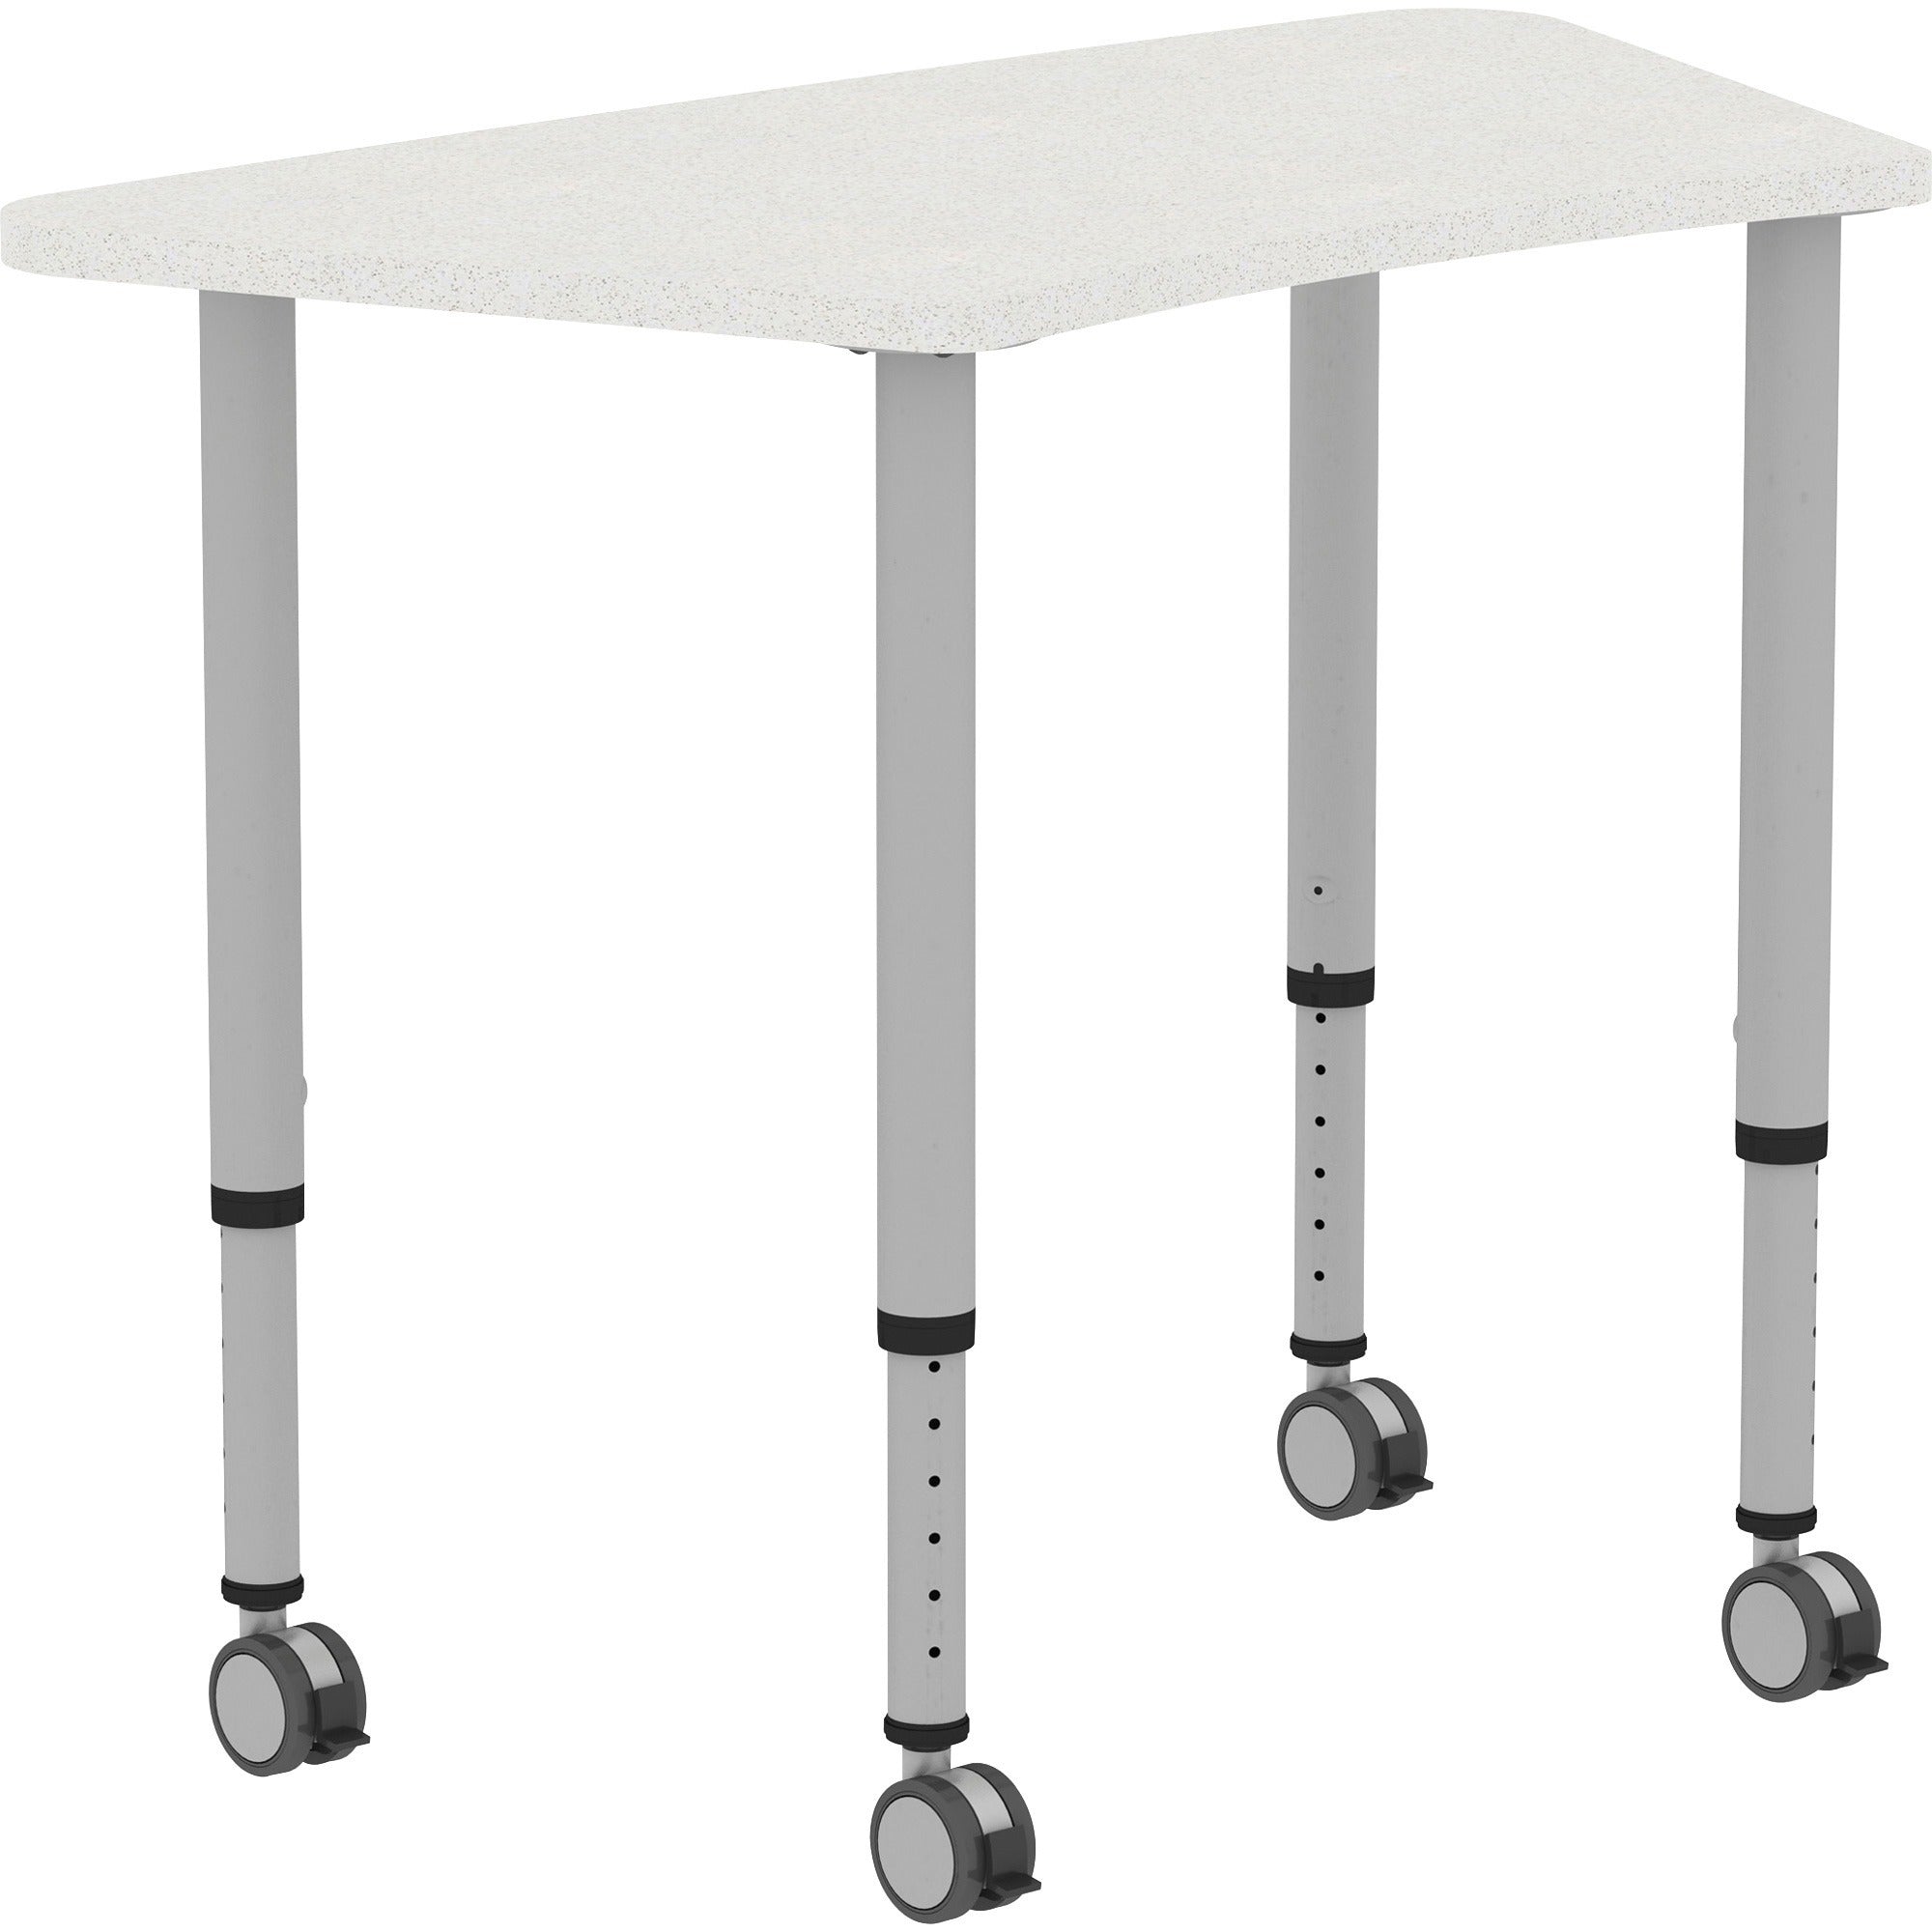 lorell-attune-height-adjustable-multipurpose-curved-table-for-table-toptrapezoid-top-adjustable-height-2662-to-3362-adjustment-x-60-table-top-width-x-2362-table-top-depth-3362-height-assembly-required-laminated-gray-laminate_llr69583 - 6